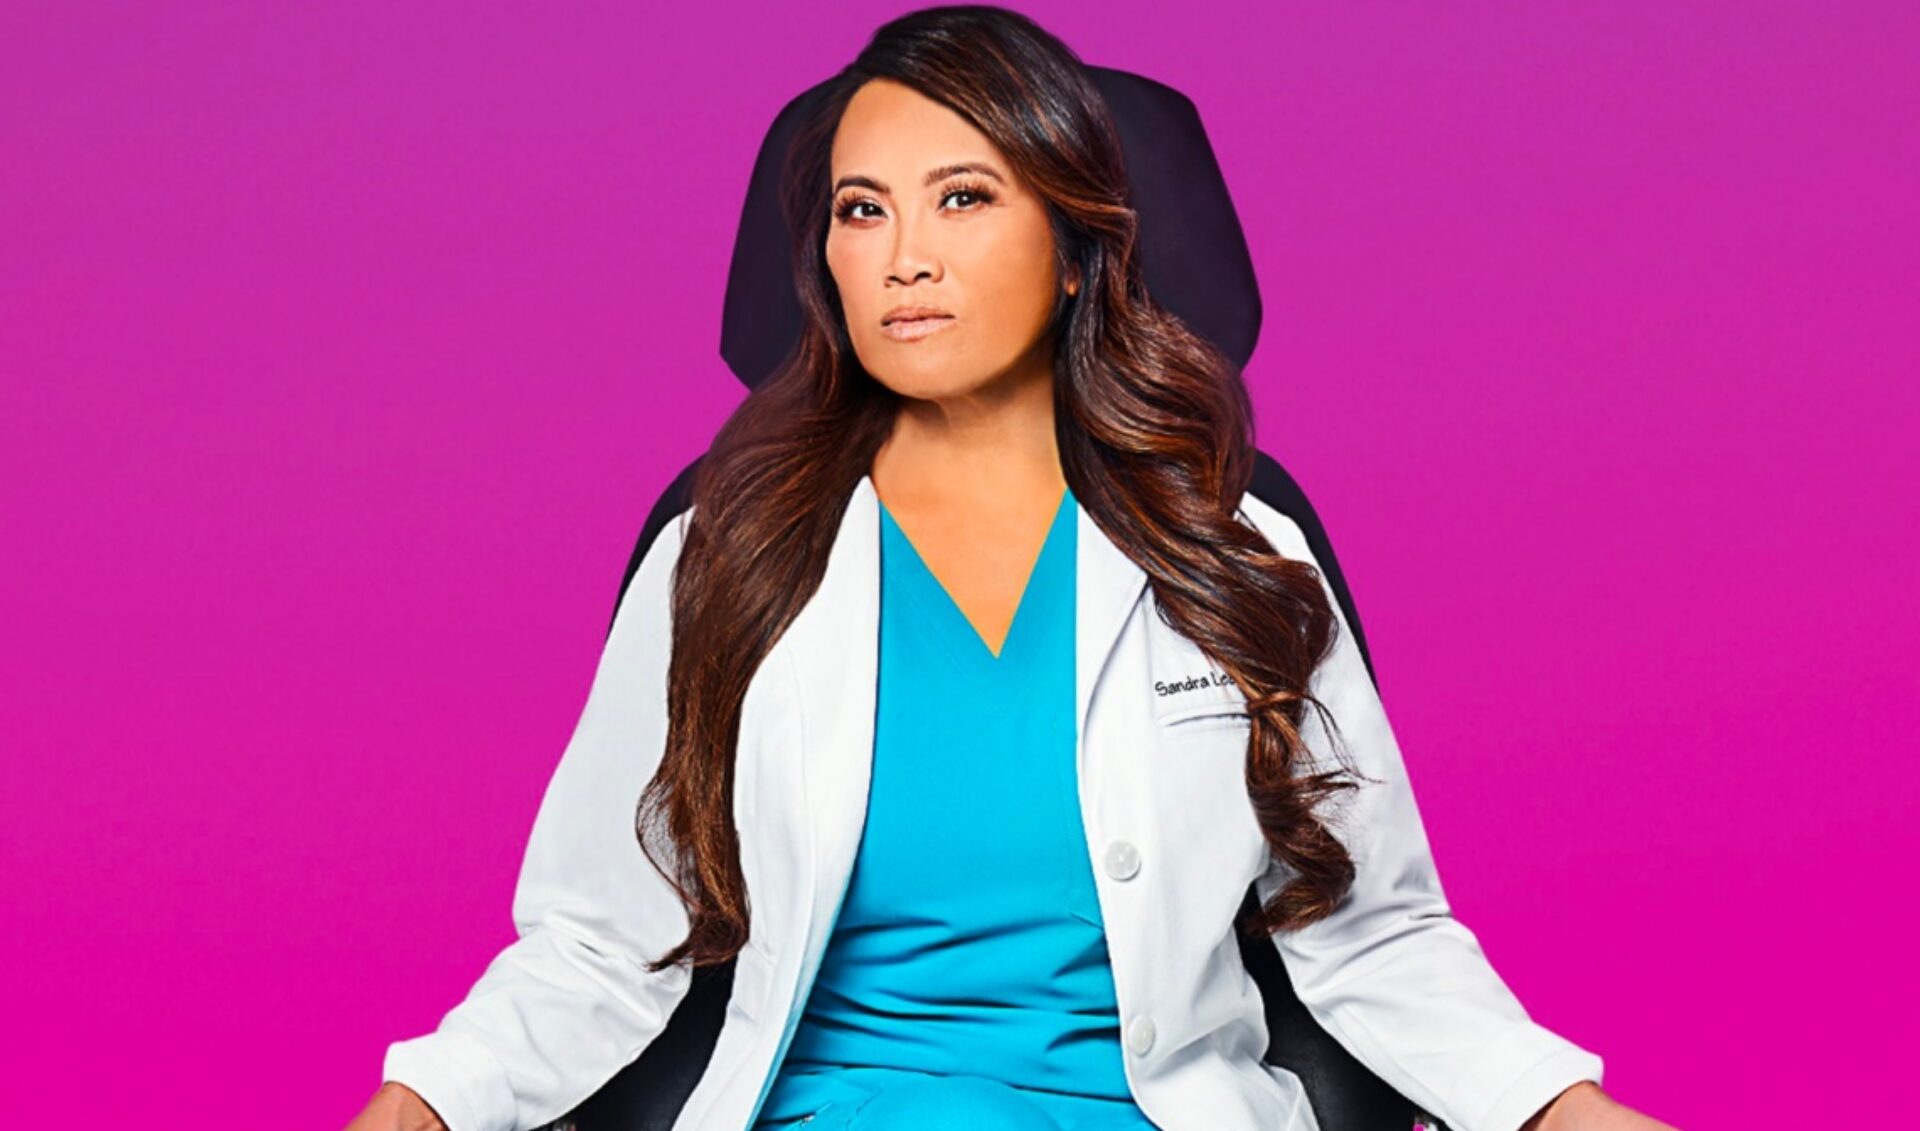 Some advertisers seem to be avoiding Dr. Pimple Popper. Are her videos safe for brands?